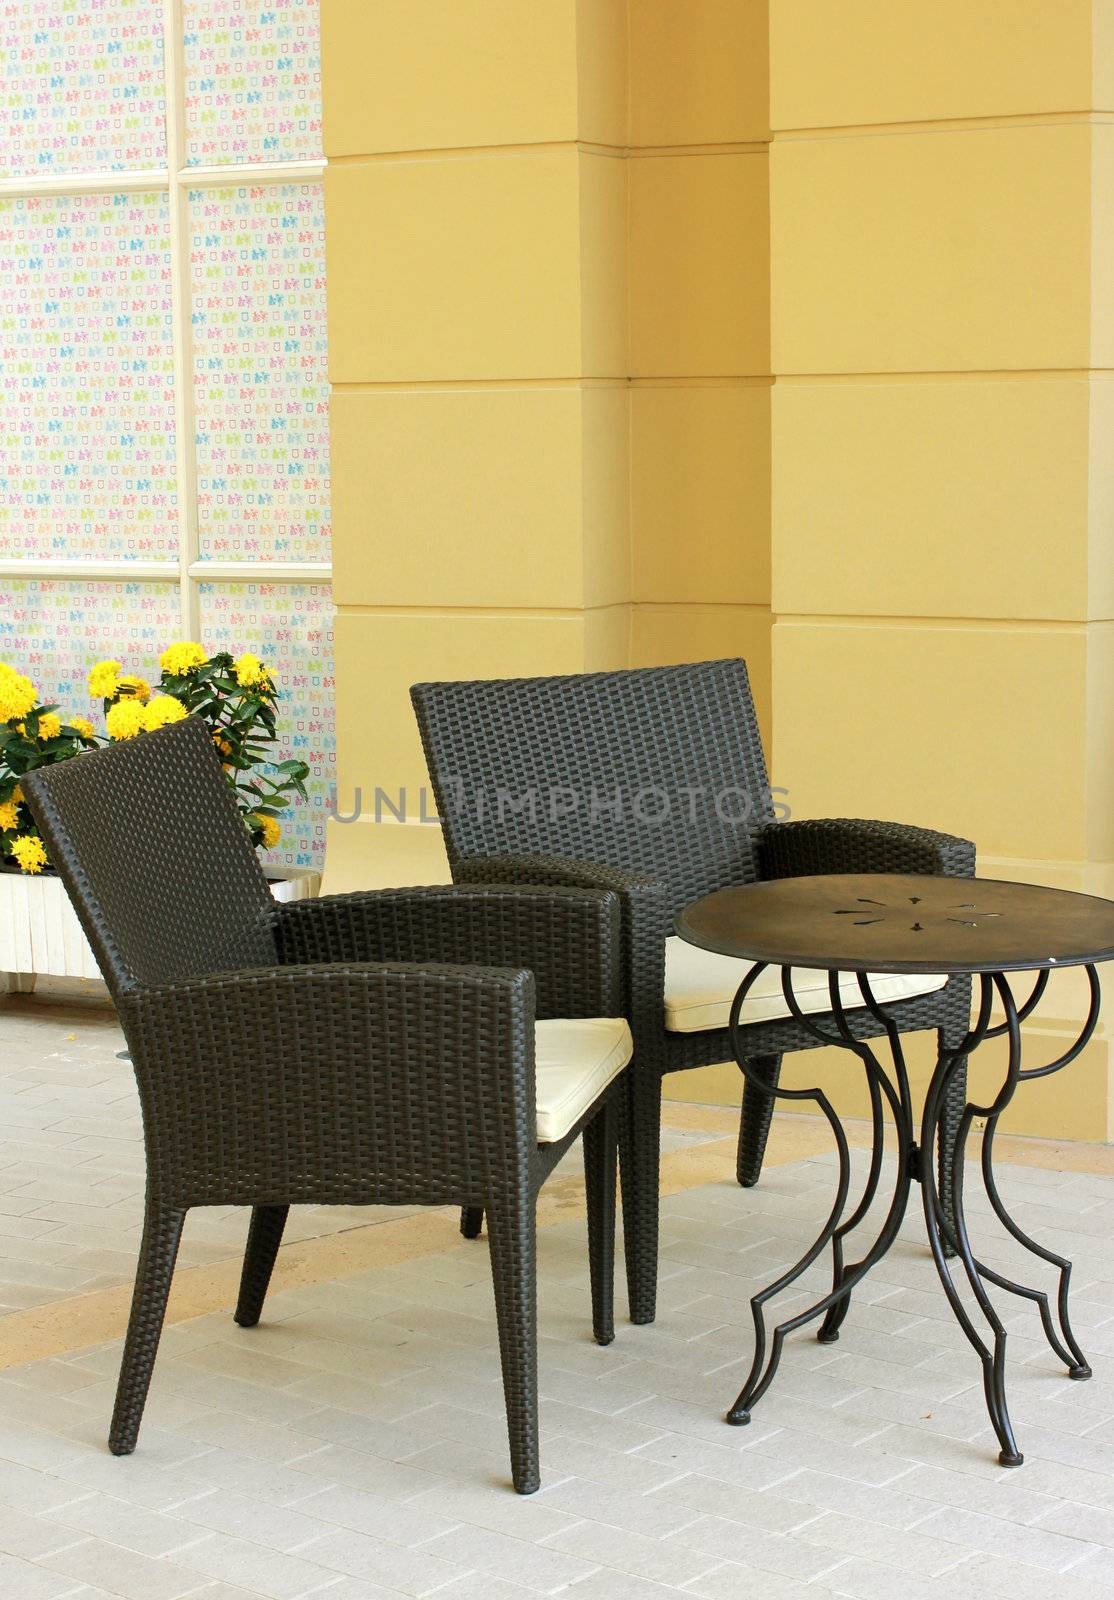 Black table and chair setting with flower in outdoor restaurant